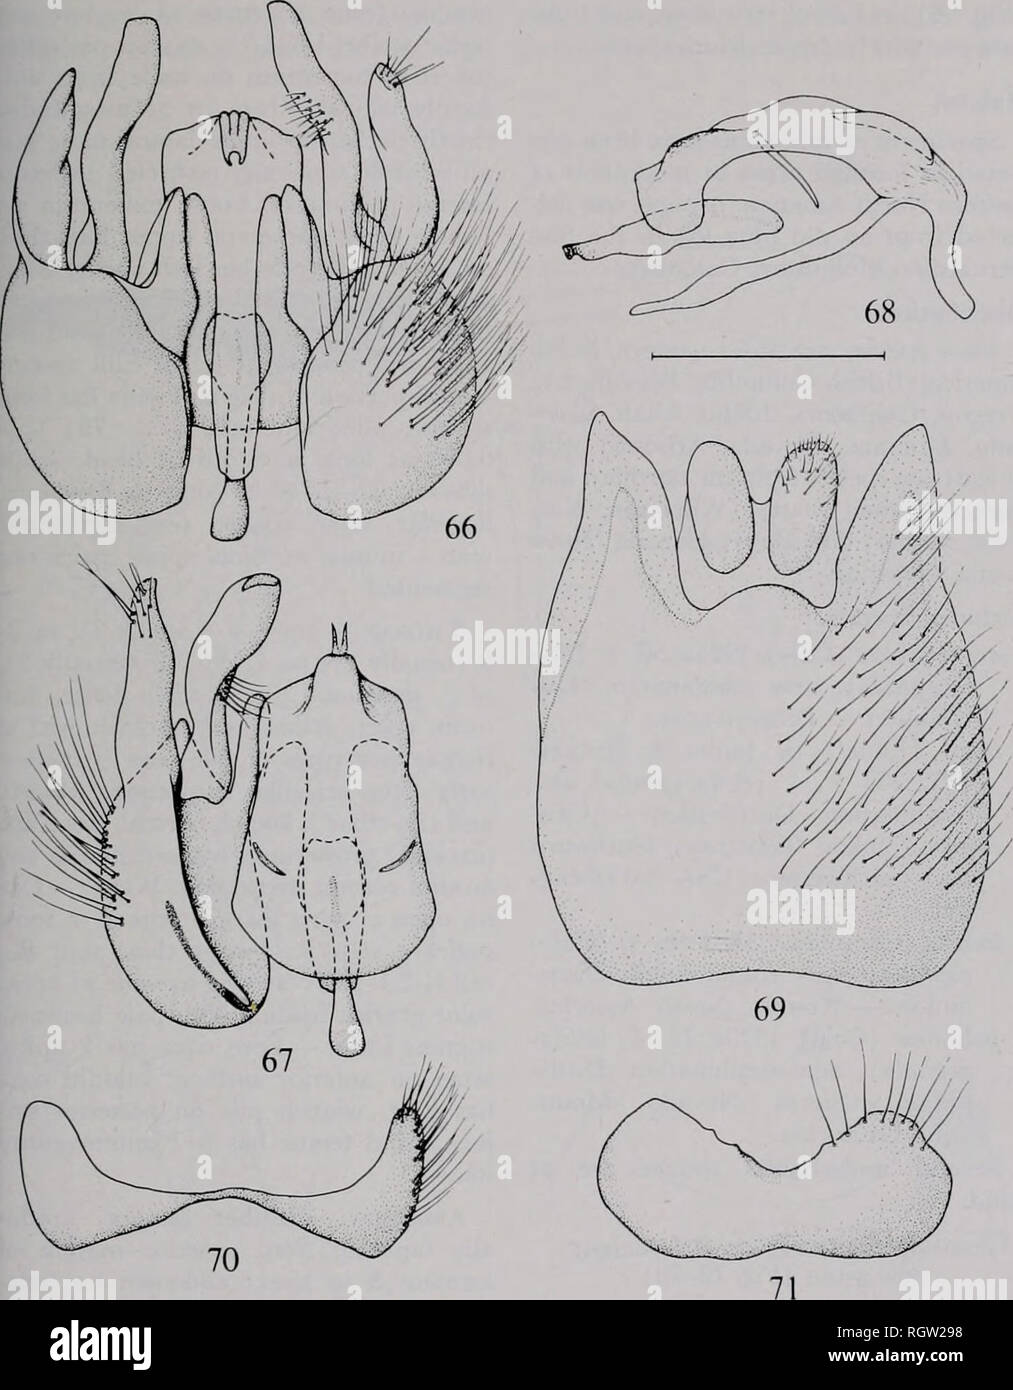 . Bulletin. Natural history; Natural history. Nov., 1980 Irwin &amp; Lyneborg: The Genera of Nearctig Therevidae 213. Fig. 66-71. — Pandivirilia limala (Coq.) male terminalia. 66. — Gonocoxite with appendages and aedeagus in ventral view. 67. — Right gonocoxite with appendages and oedeagus in dorsal view. 68. — Aedeagus in lateral view. 69. — Epandrium with appendages in dorsal view. 70. — Tergite 8. 71. — Sternite 8. Scale: 0.5 mm. slightly extended anteriorly beyond dor- sal apodeme; ventral lobes of gonocoxites large, rounded, directed obliquely up- ward, with a membranous attachment to ven Stock Photo